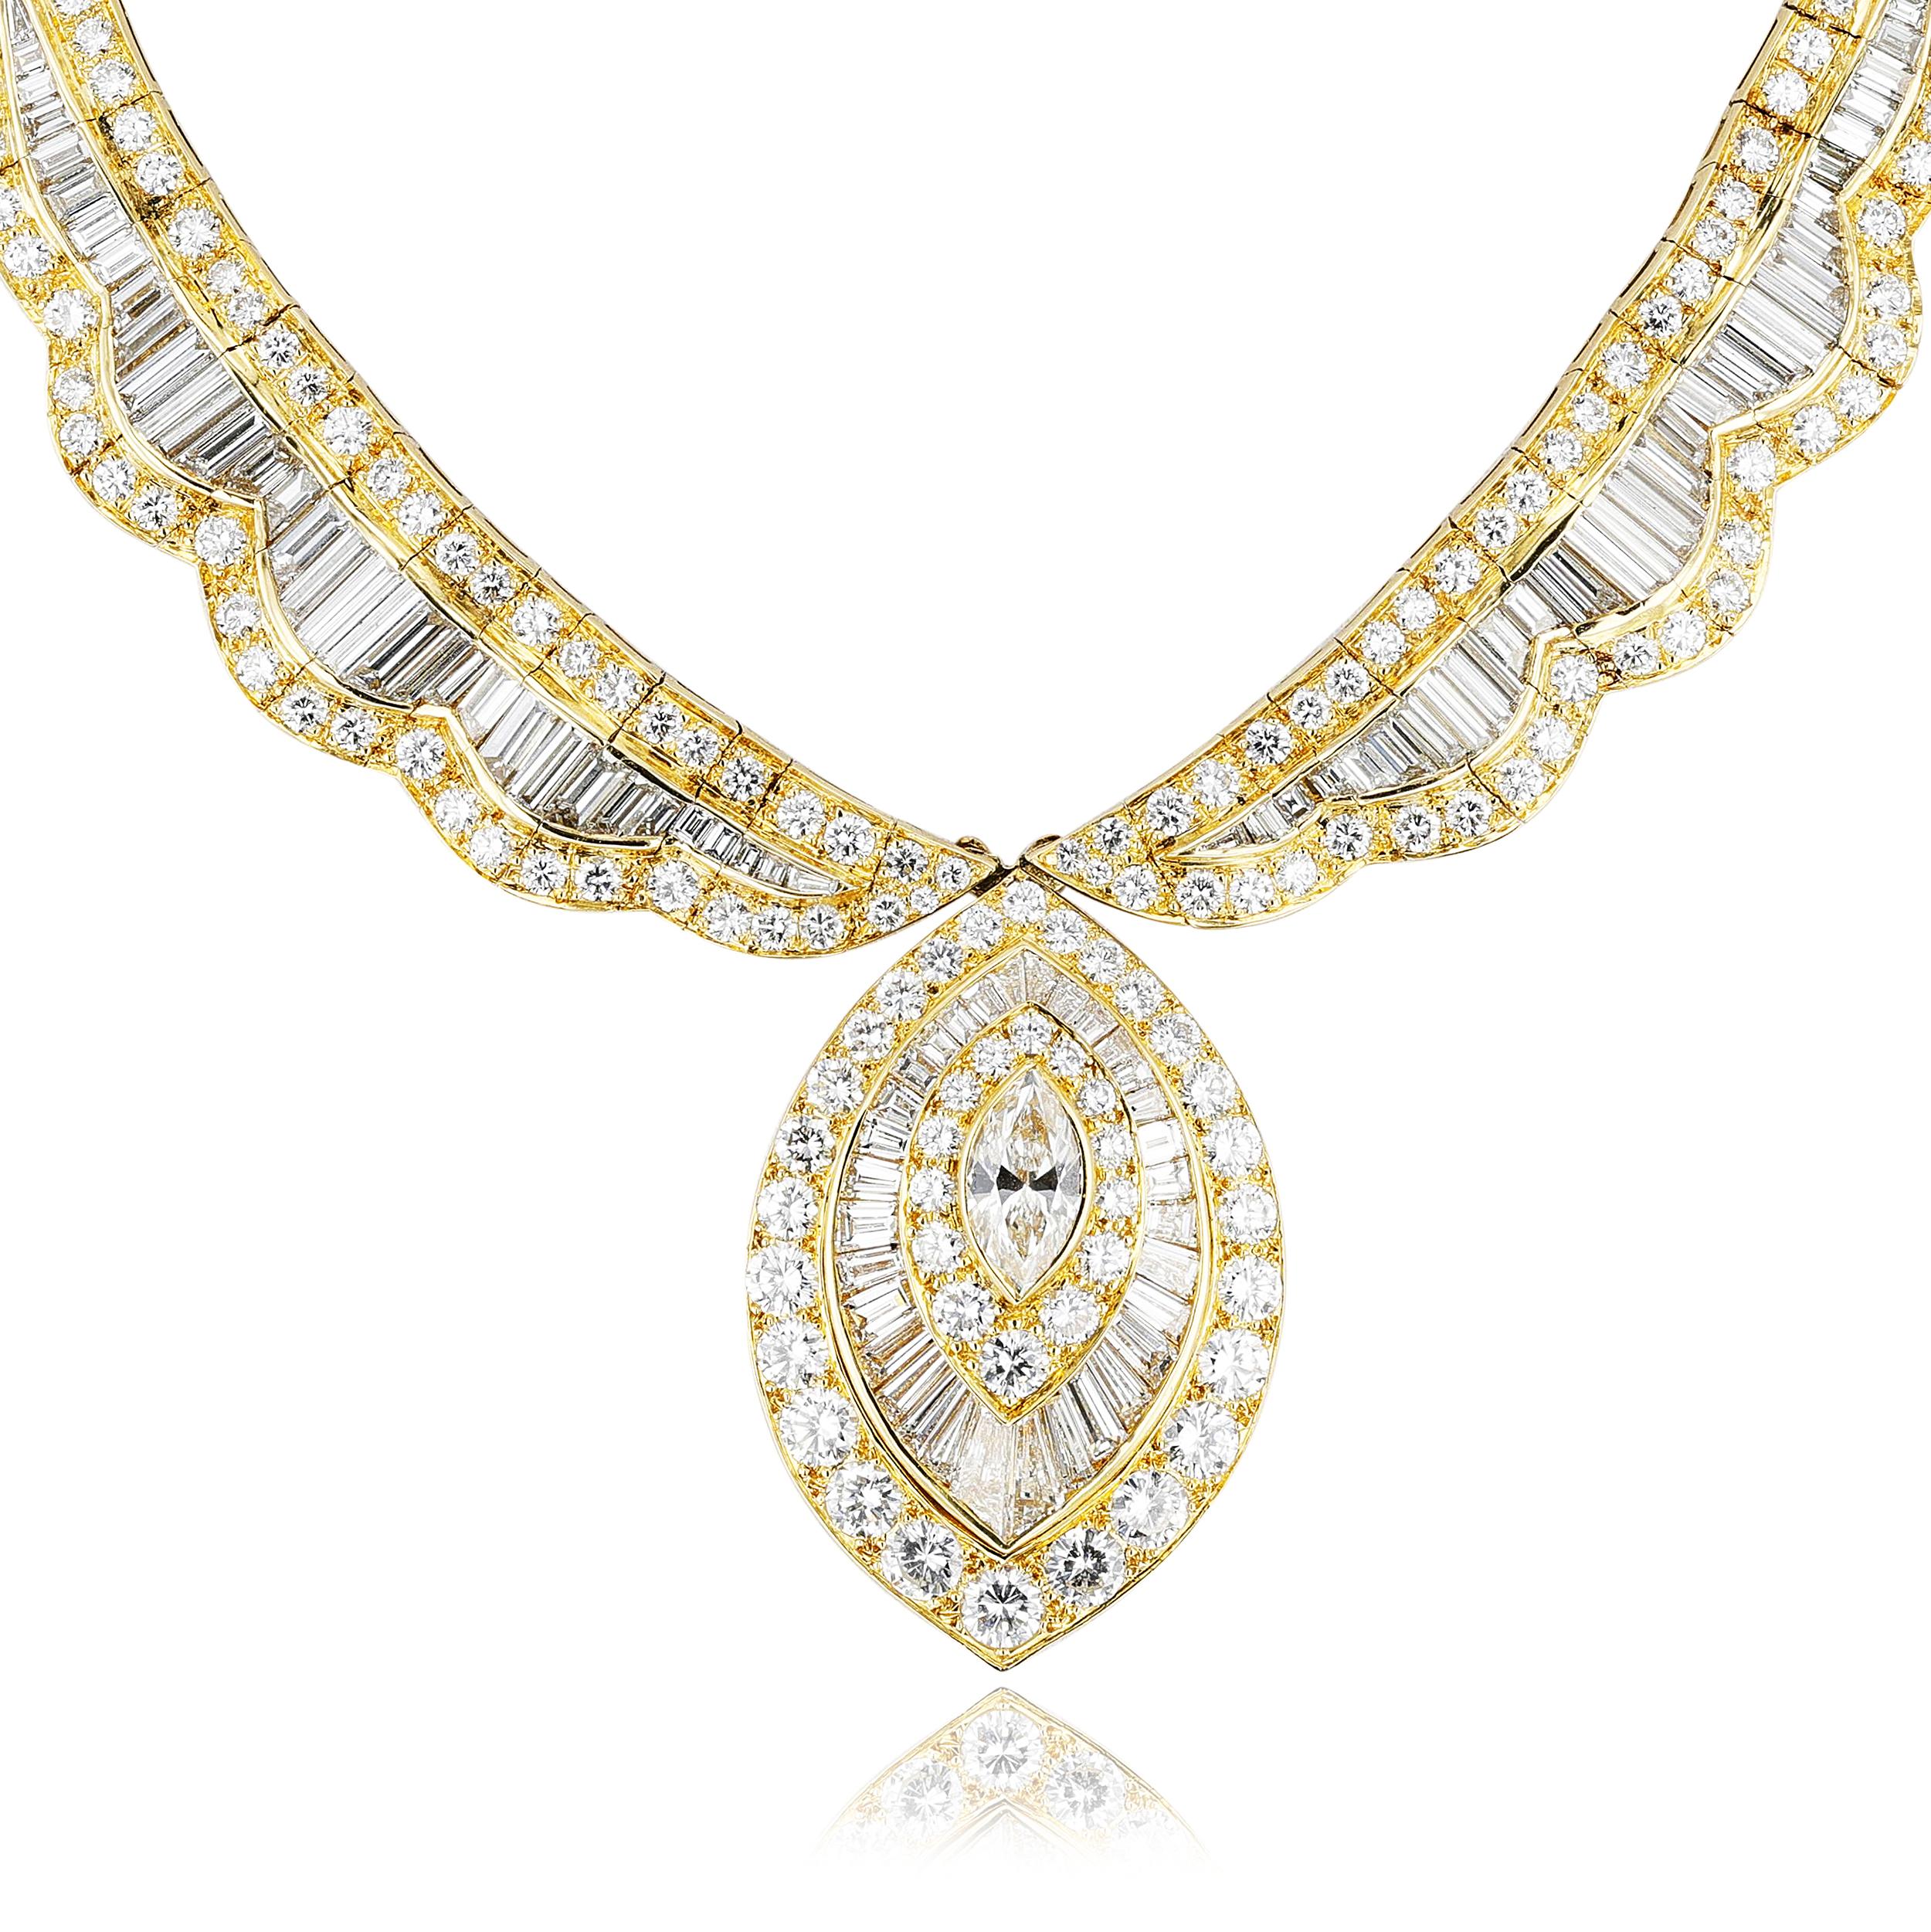 French Van Cleef & Arpels Marquise Center Diamond Necklace For Sale 1